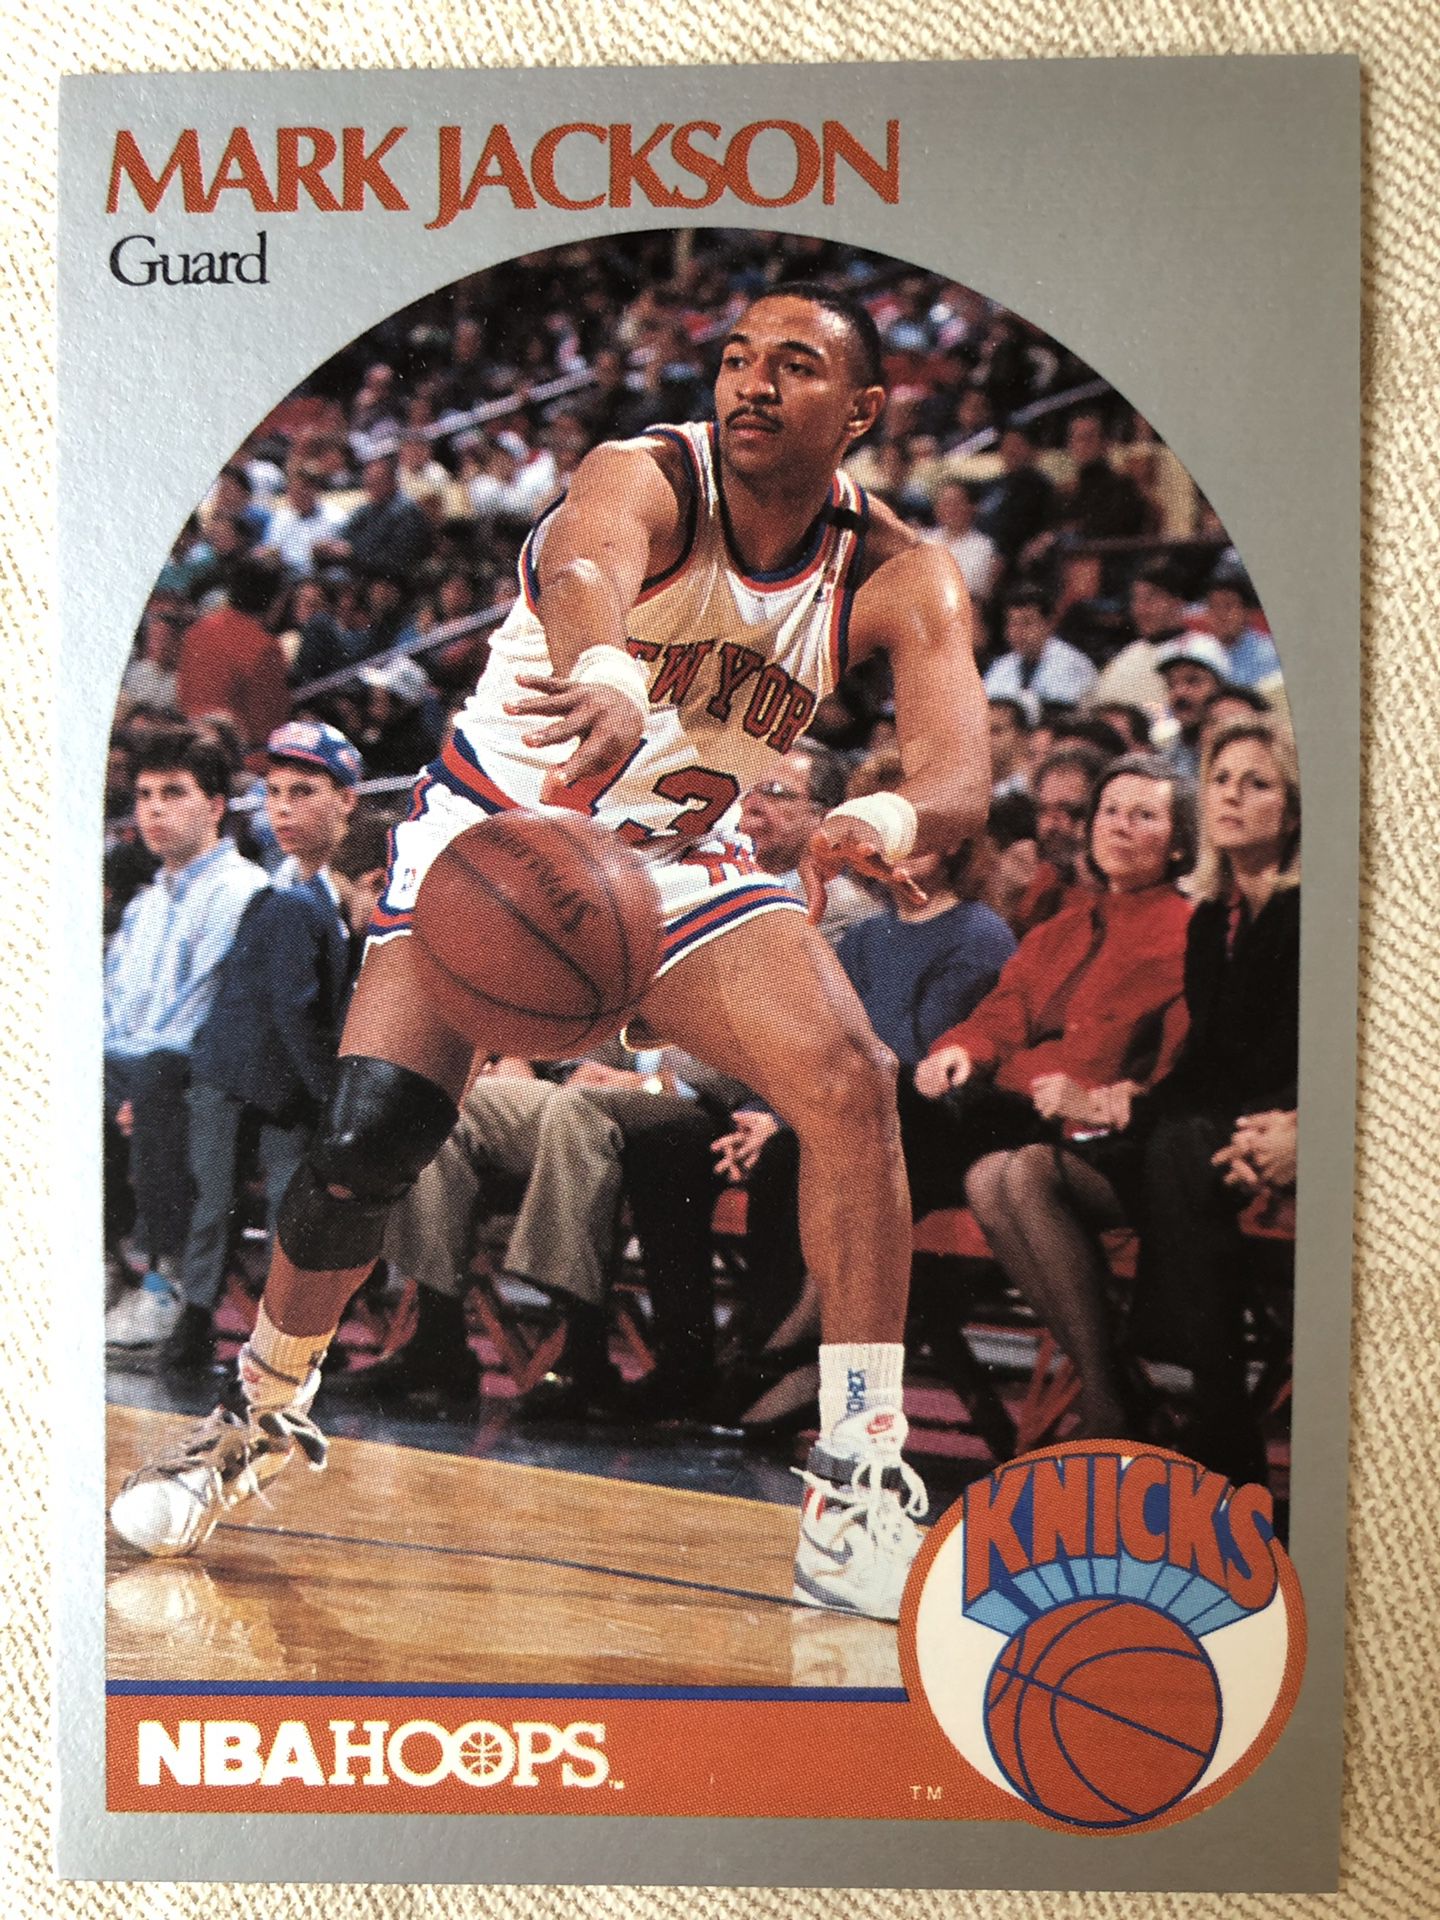 1990 NBA HOOPS #205 MARK JACKSON W/ Menendez Brothers in Background - Mint Condition